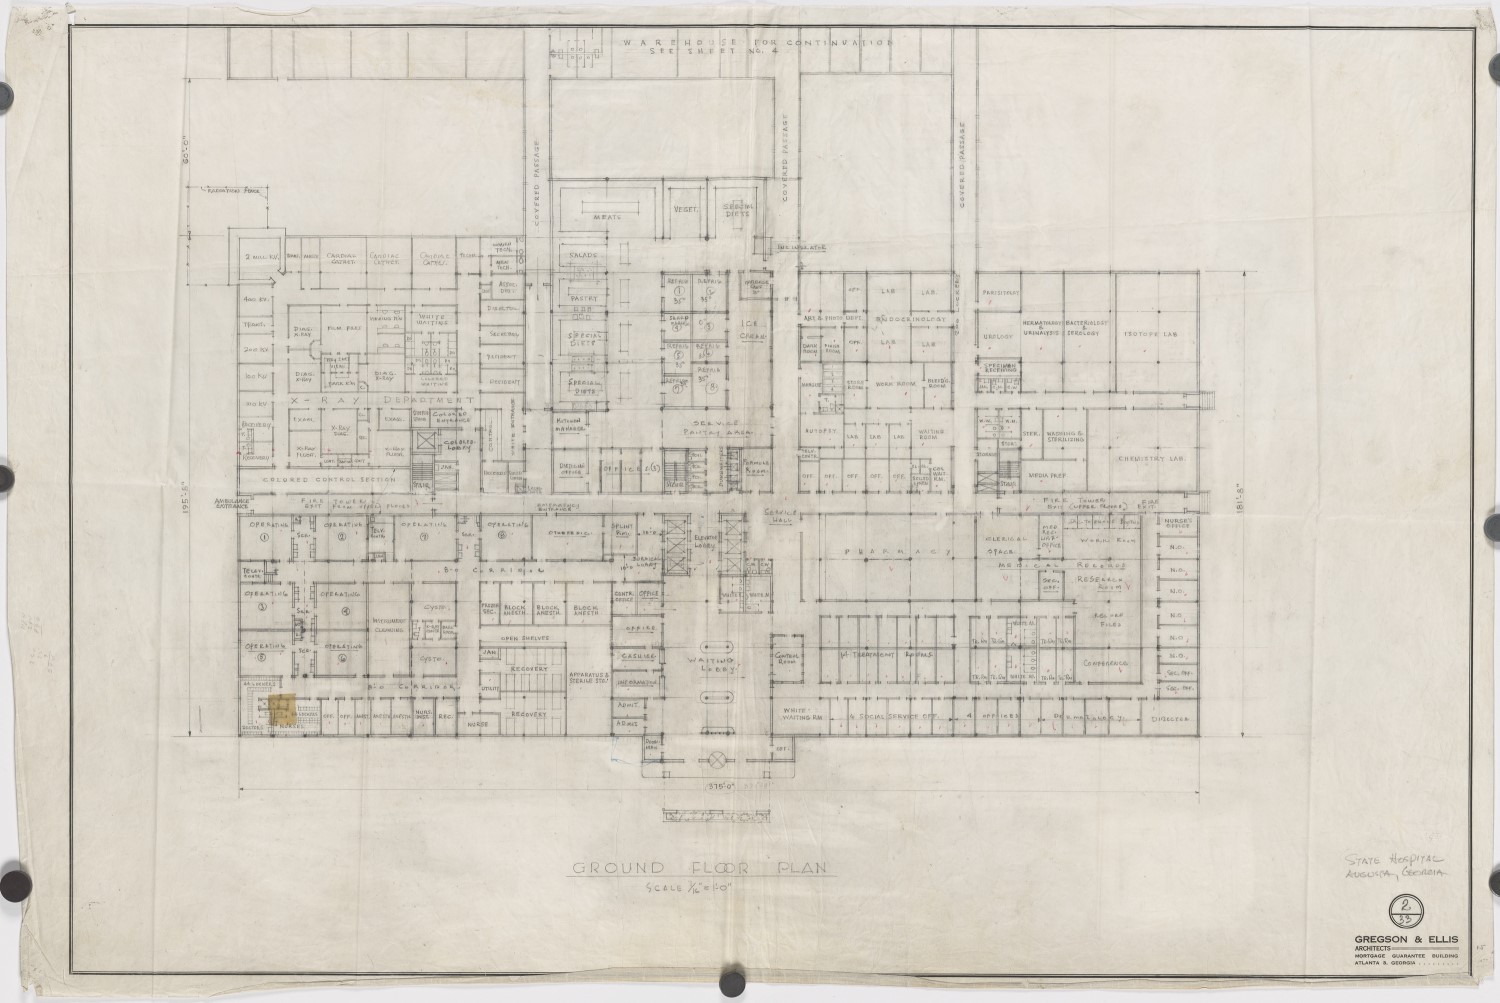 Plan for the main floor of the Augusta State Hospital Complex, circa 1953